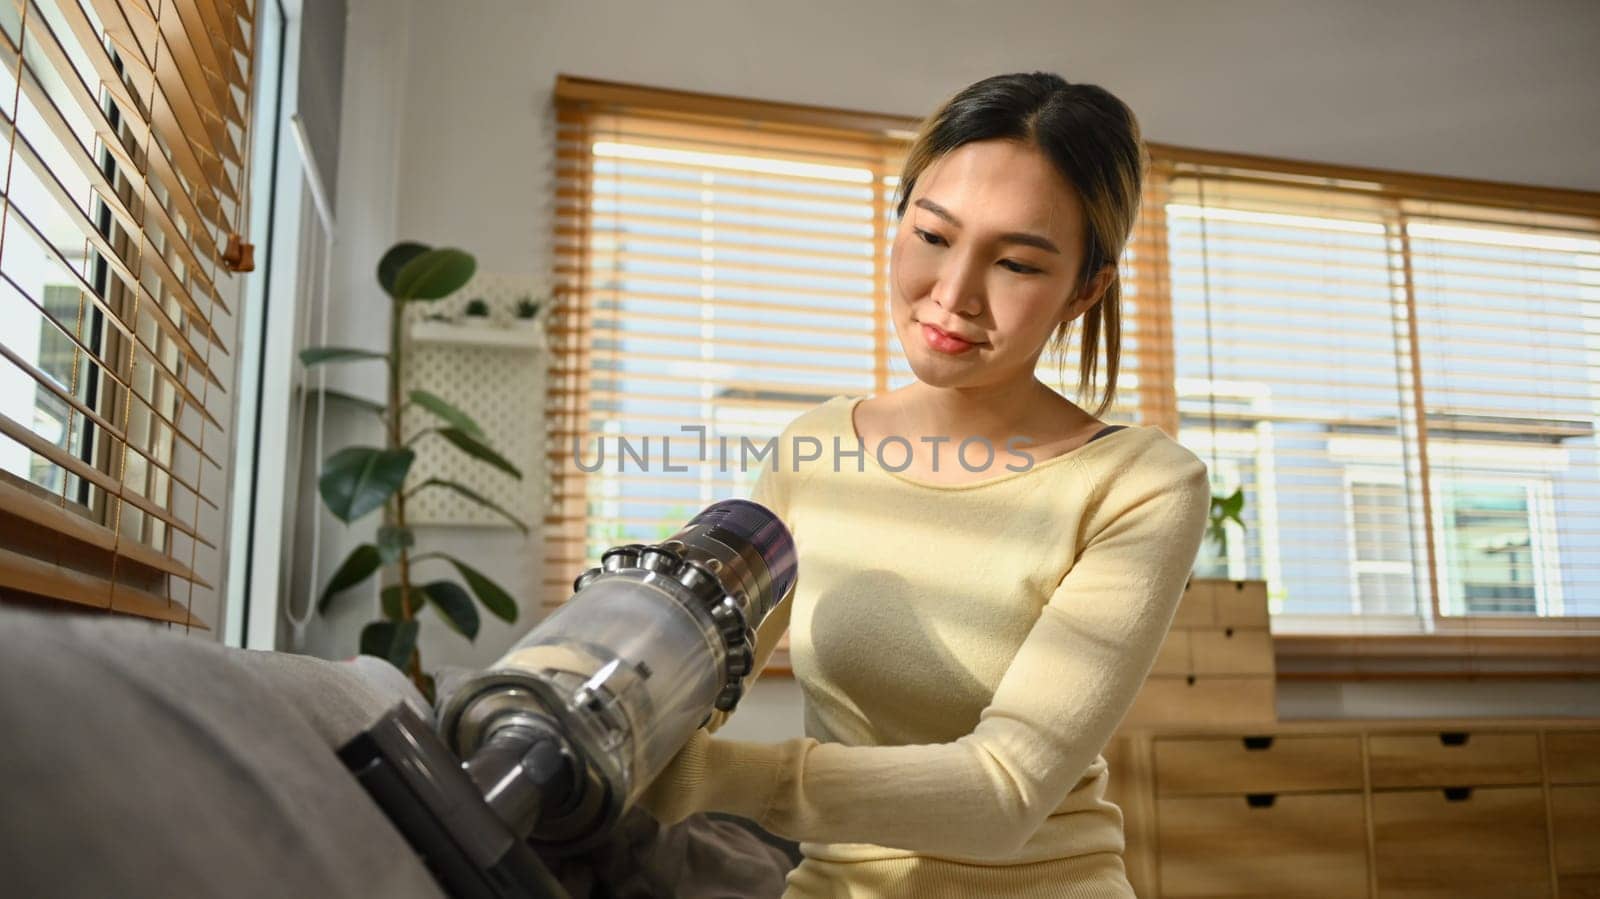 Beautiful female housewife vacuuming sofa with cordless handheld vacuum cleaner. Housework concept.